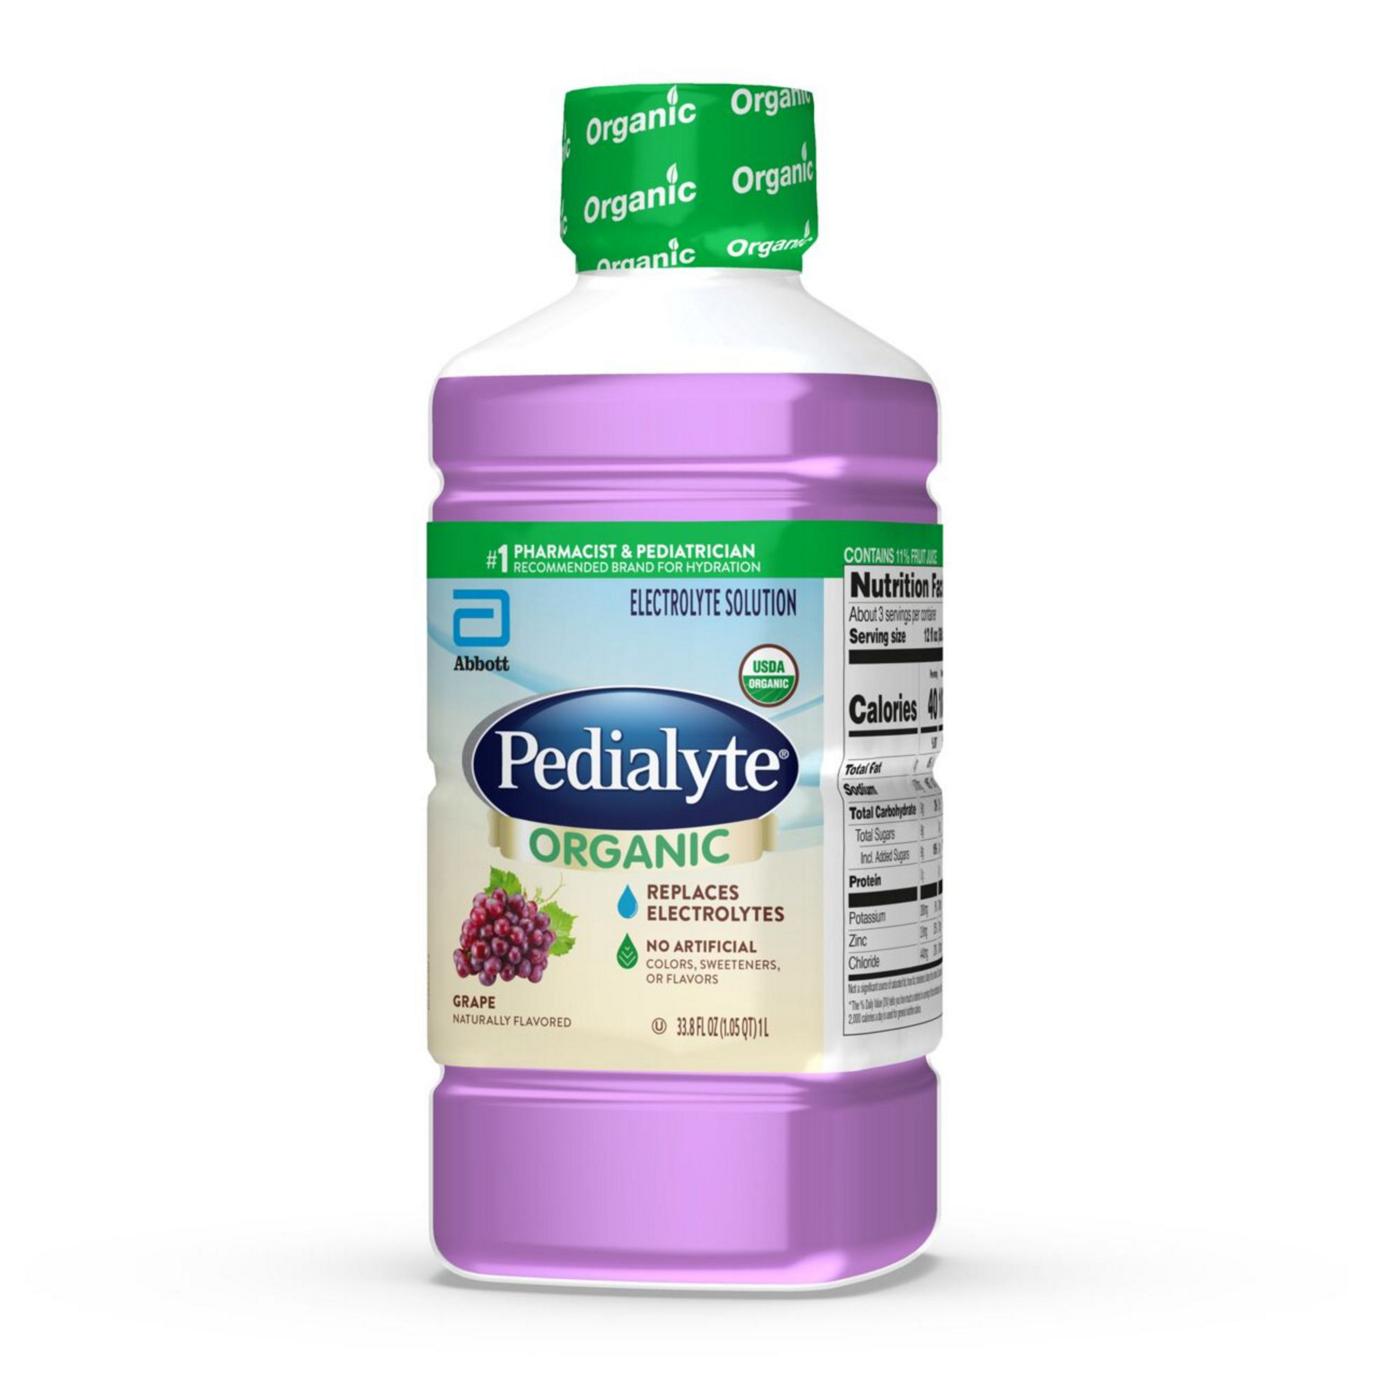 Pedialyte Organic Electrolyte Solution - Grape; image 2 of 9